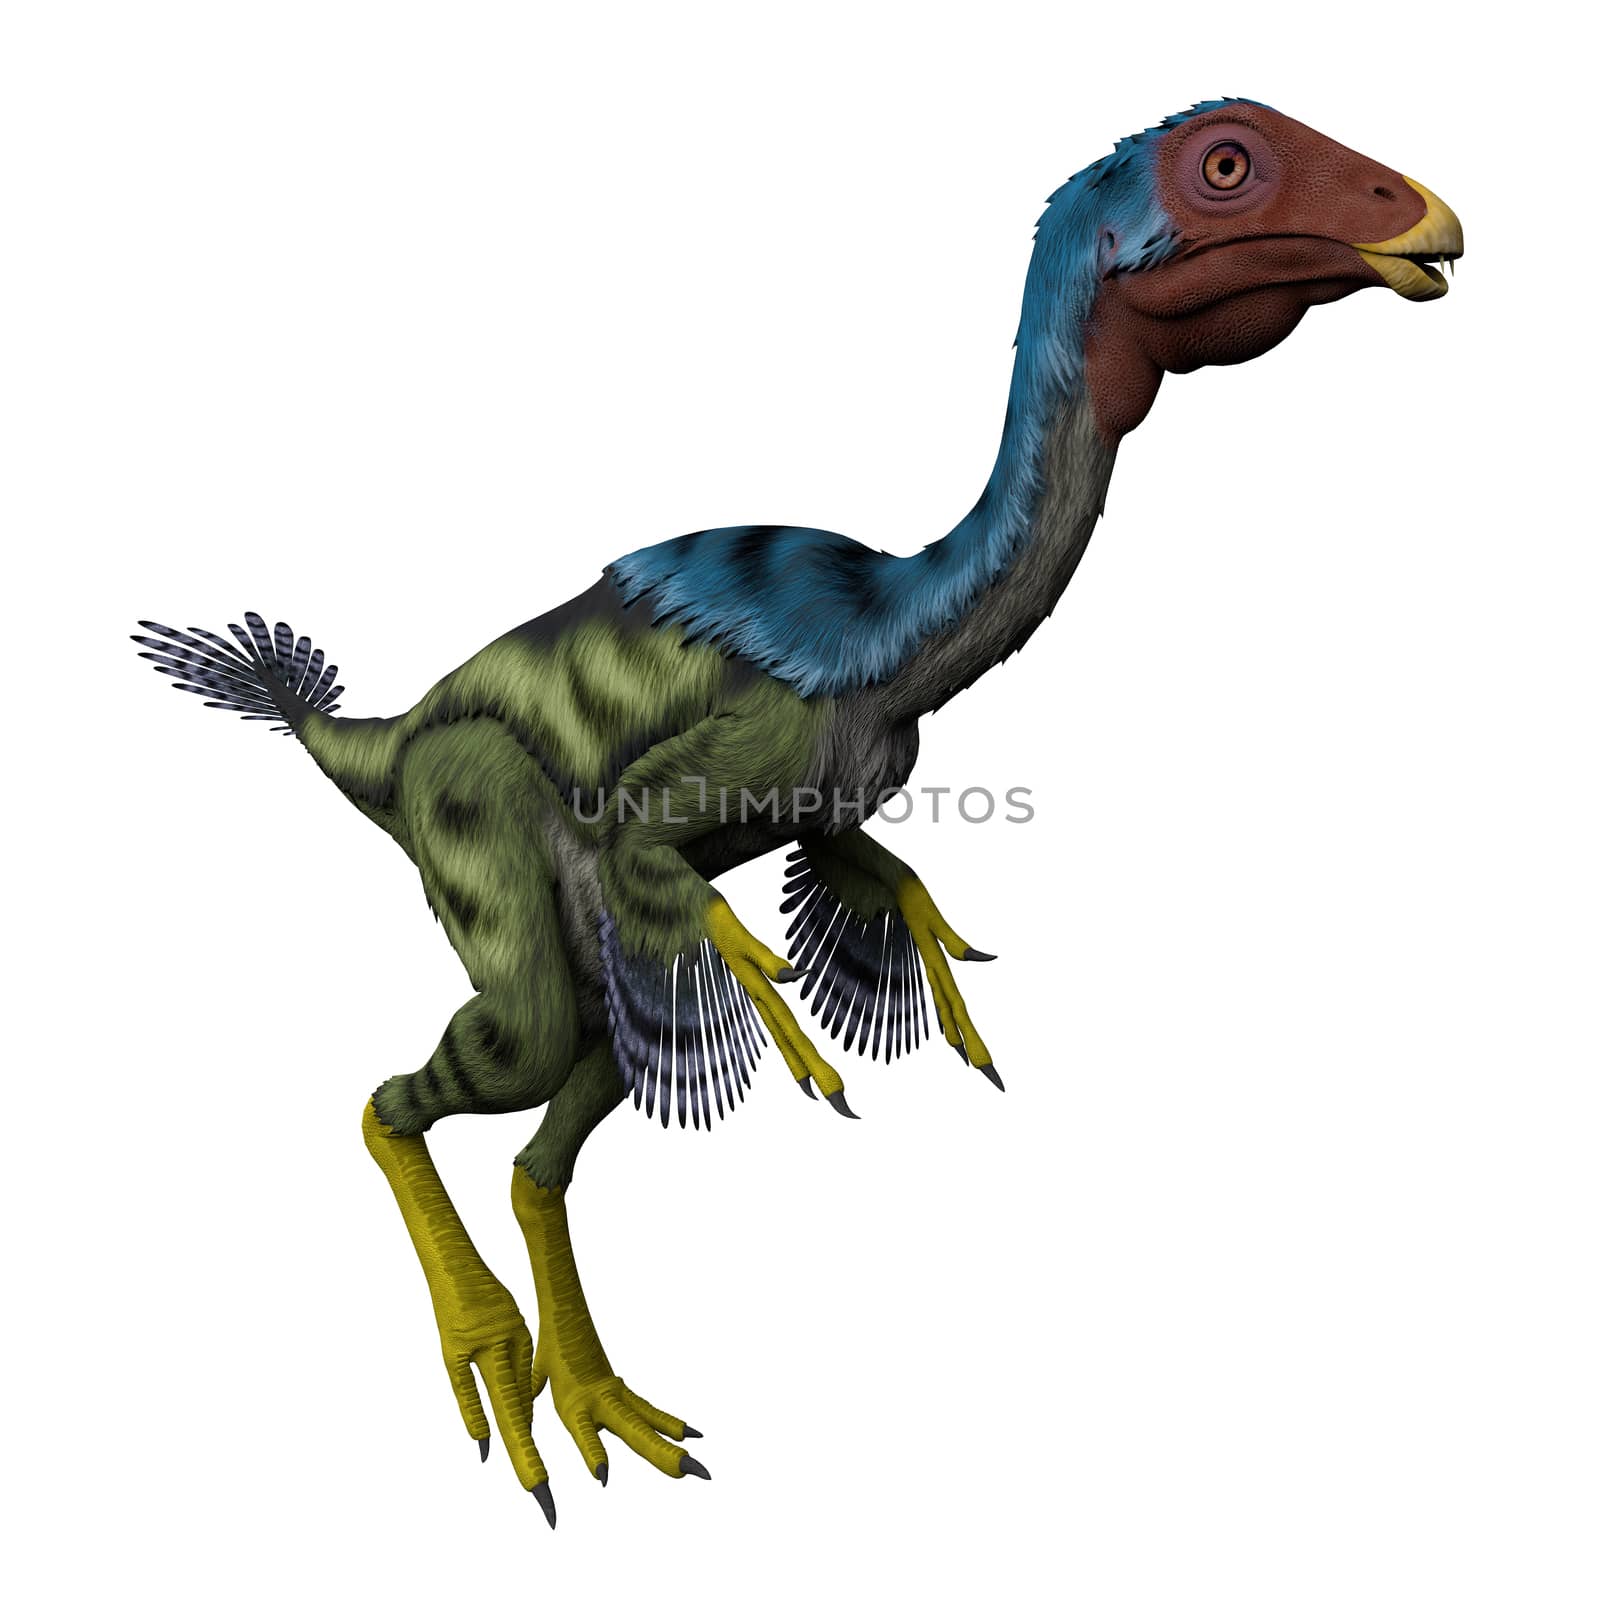 Caudipteryx was a peacock-sized oviraptor dinosaur that lived in China during the Cretaceous Period.